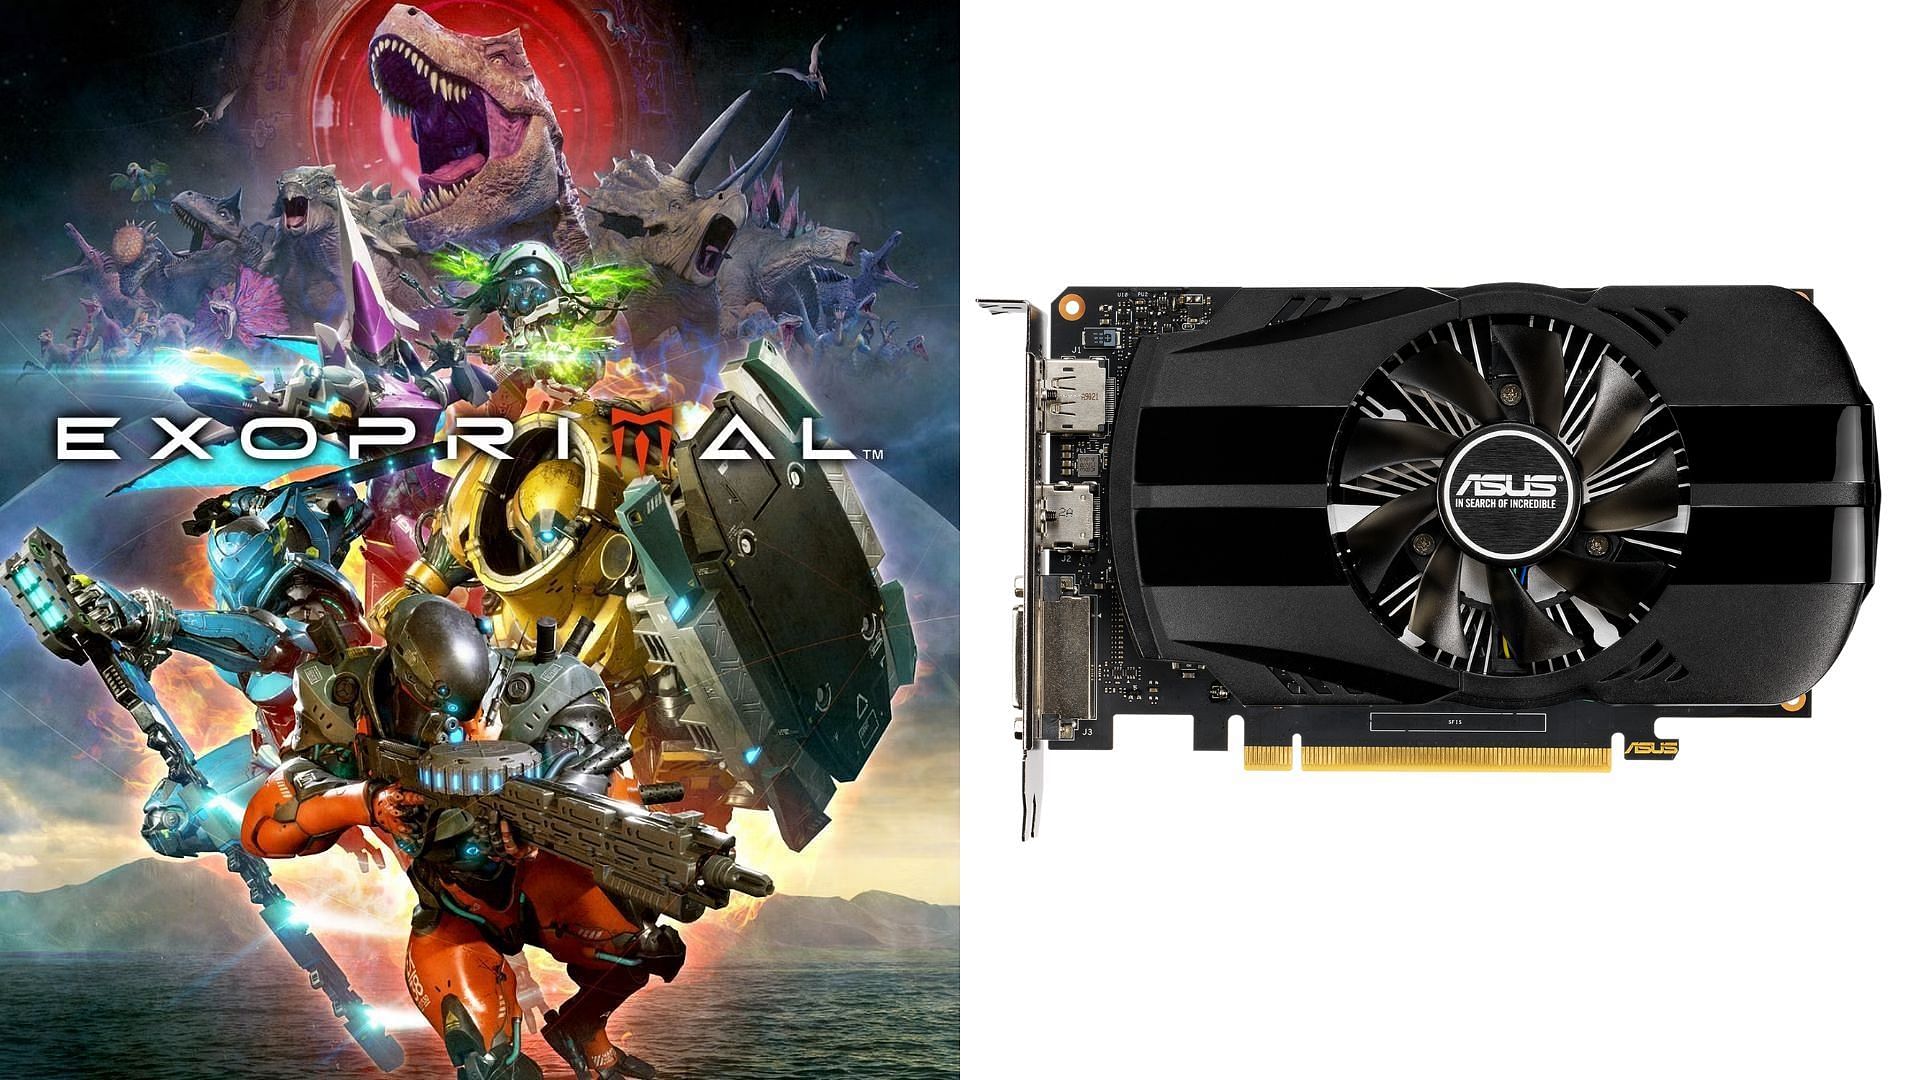 The GTX 1650 and 1650 Super are great video cards for Exoprimal (Image via Capcom and Asus)